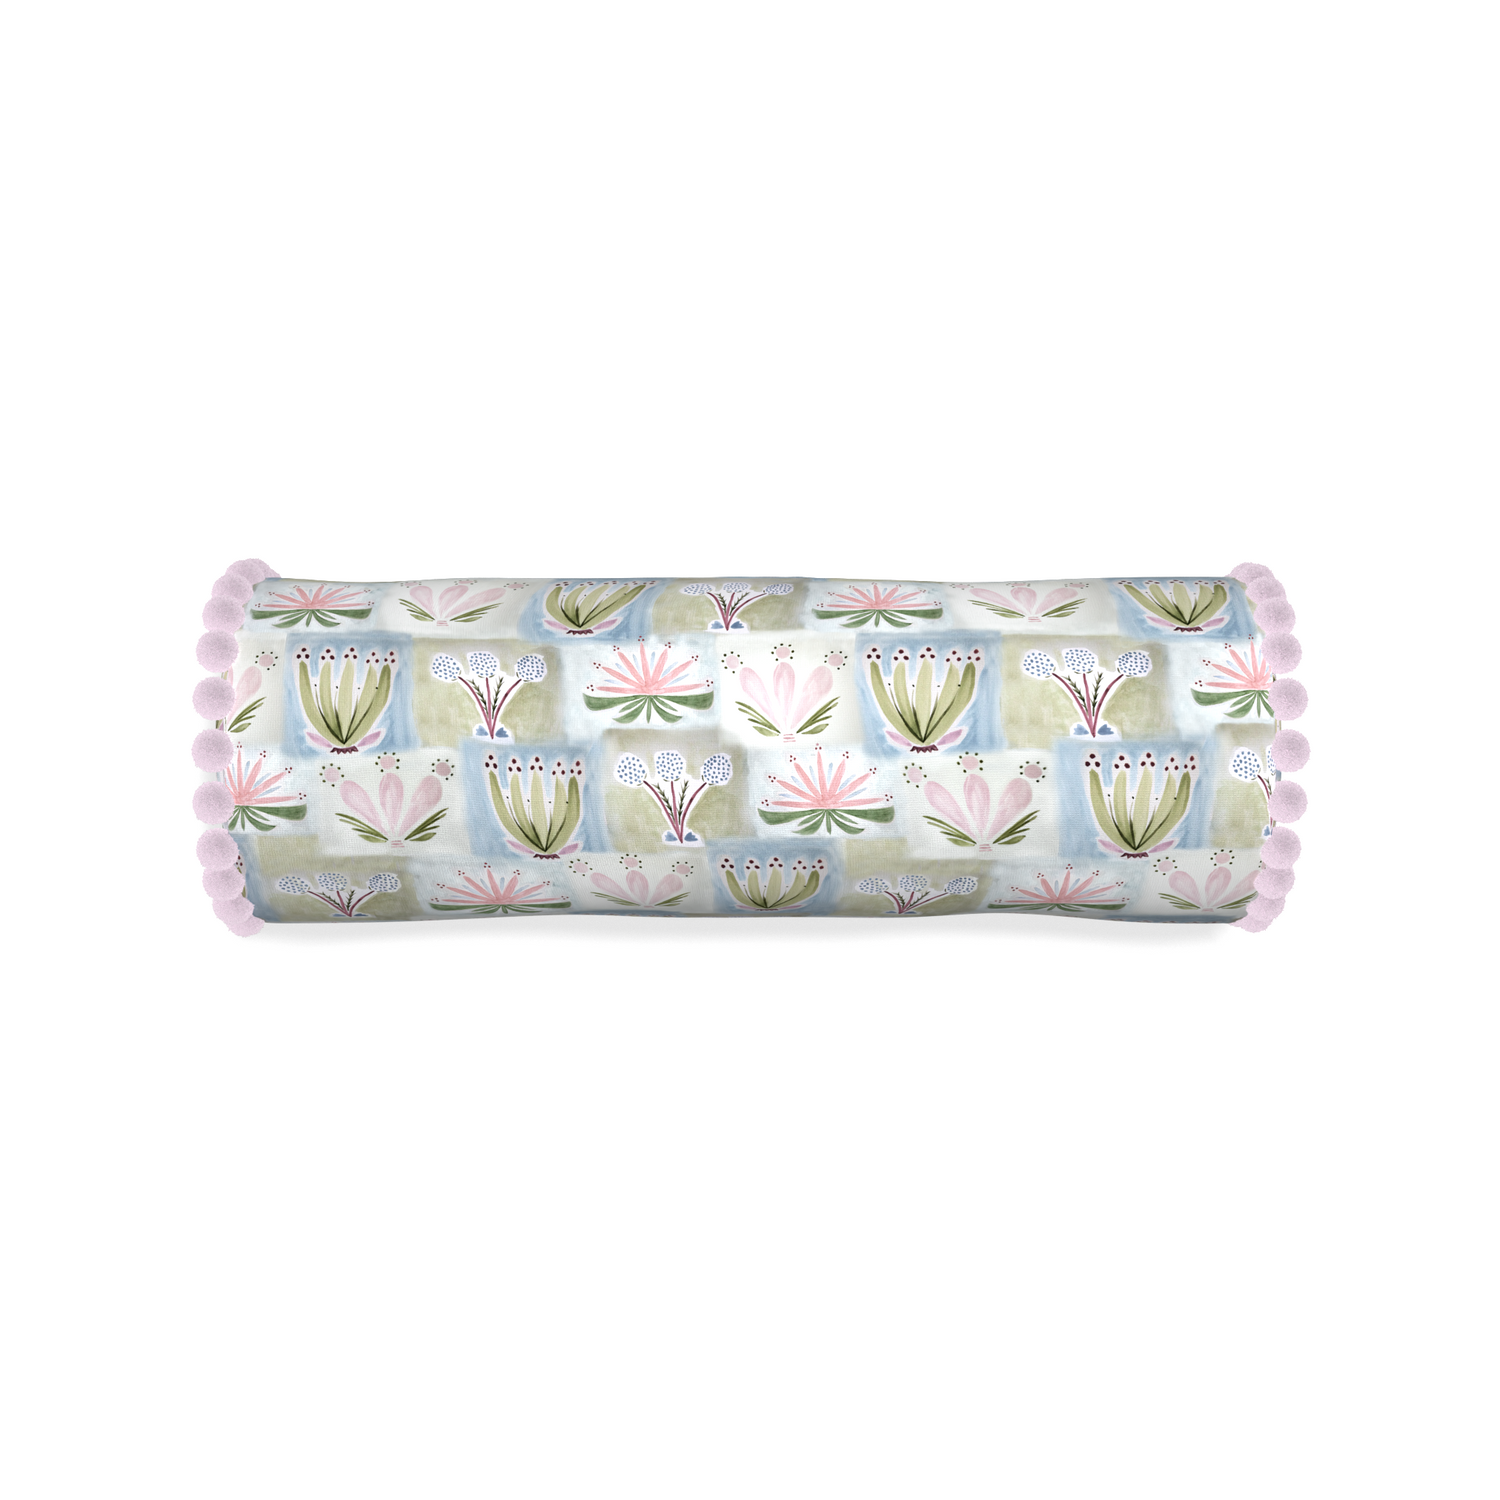 Bolster harper custom hand-painted floralpillow with l on white background